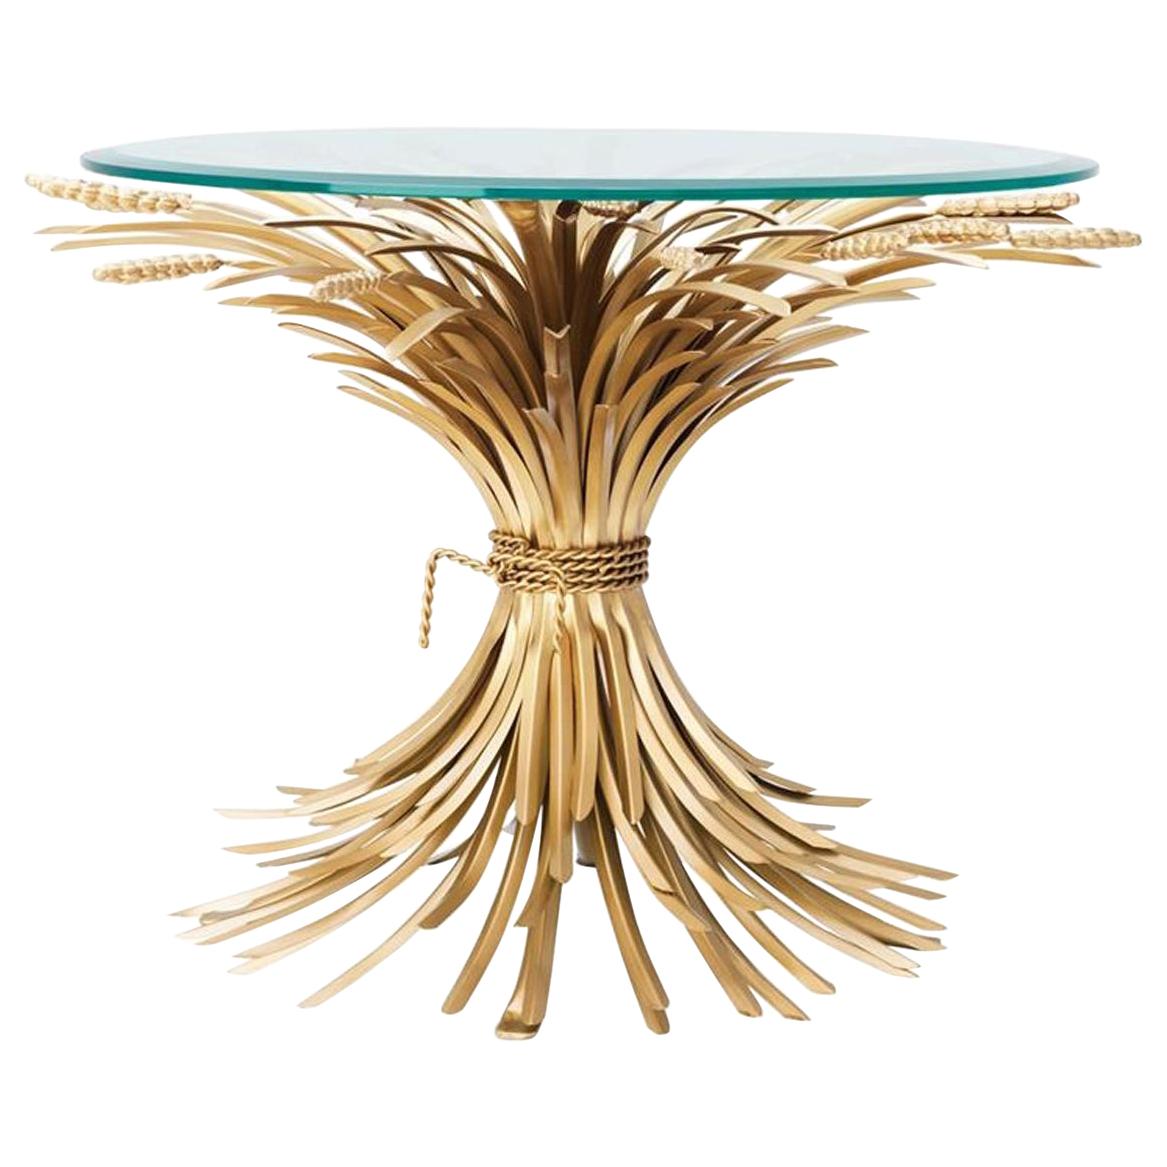 Wheat Sheaf Side Table in Antique Gold Finish with Glass Top